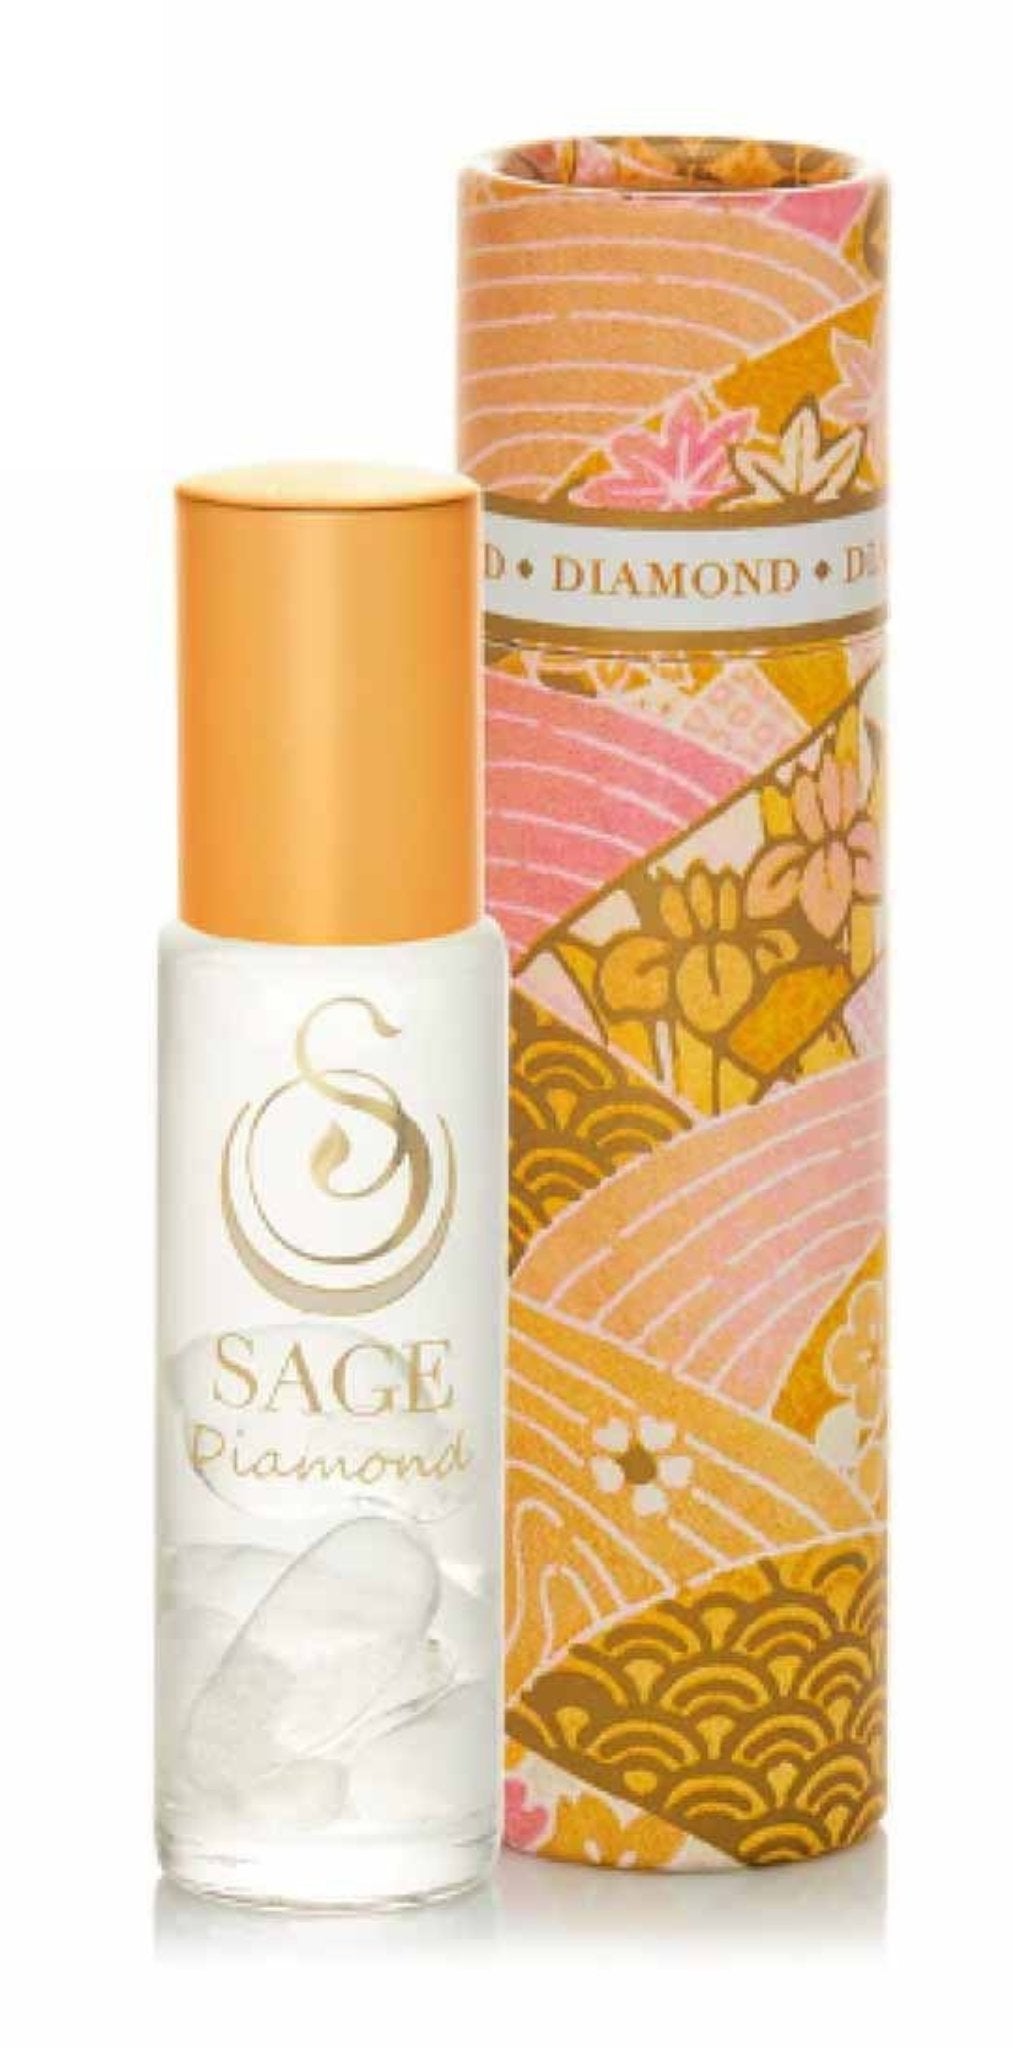 Diamond 1/4 oz Gemstone Perfume Oil Concentrate Roll-On by Sage